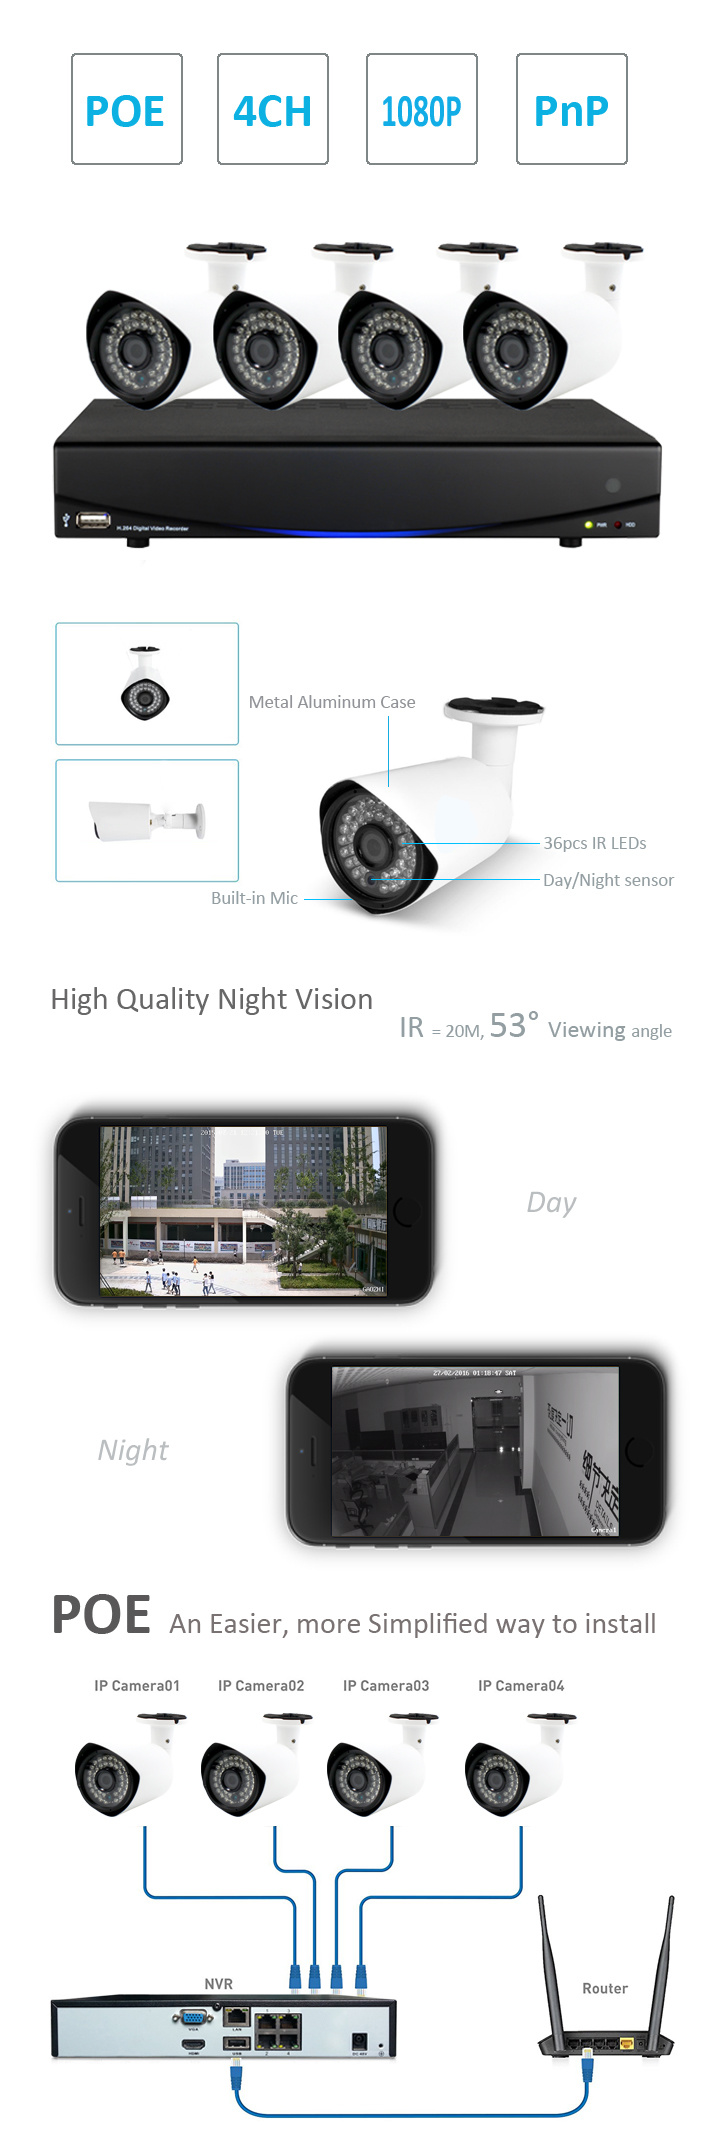 4CH 2MP CCTV Camera System for Home Security with Outdoor Security Camera